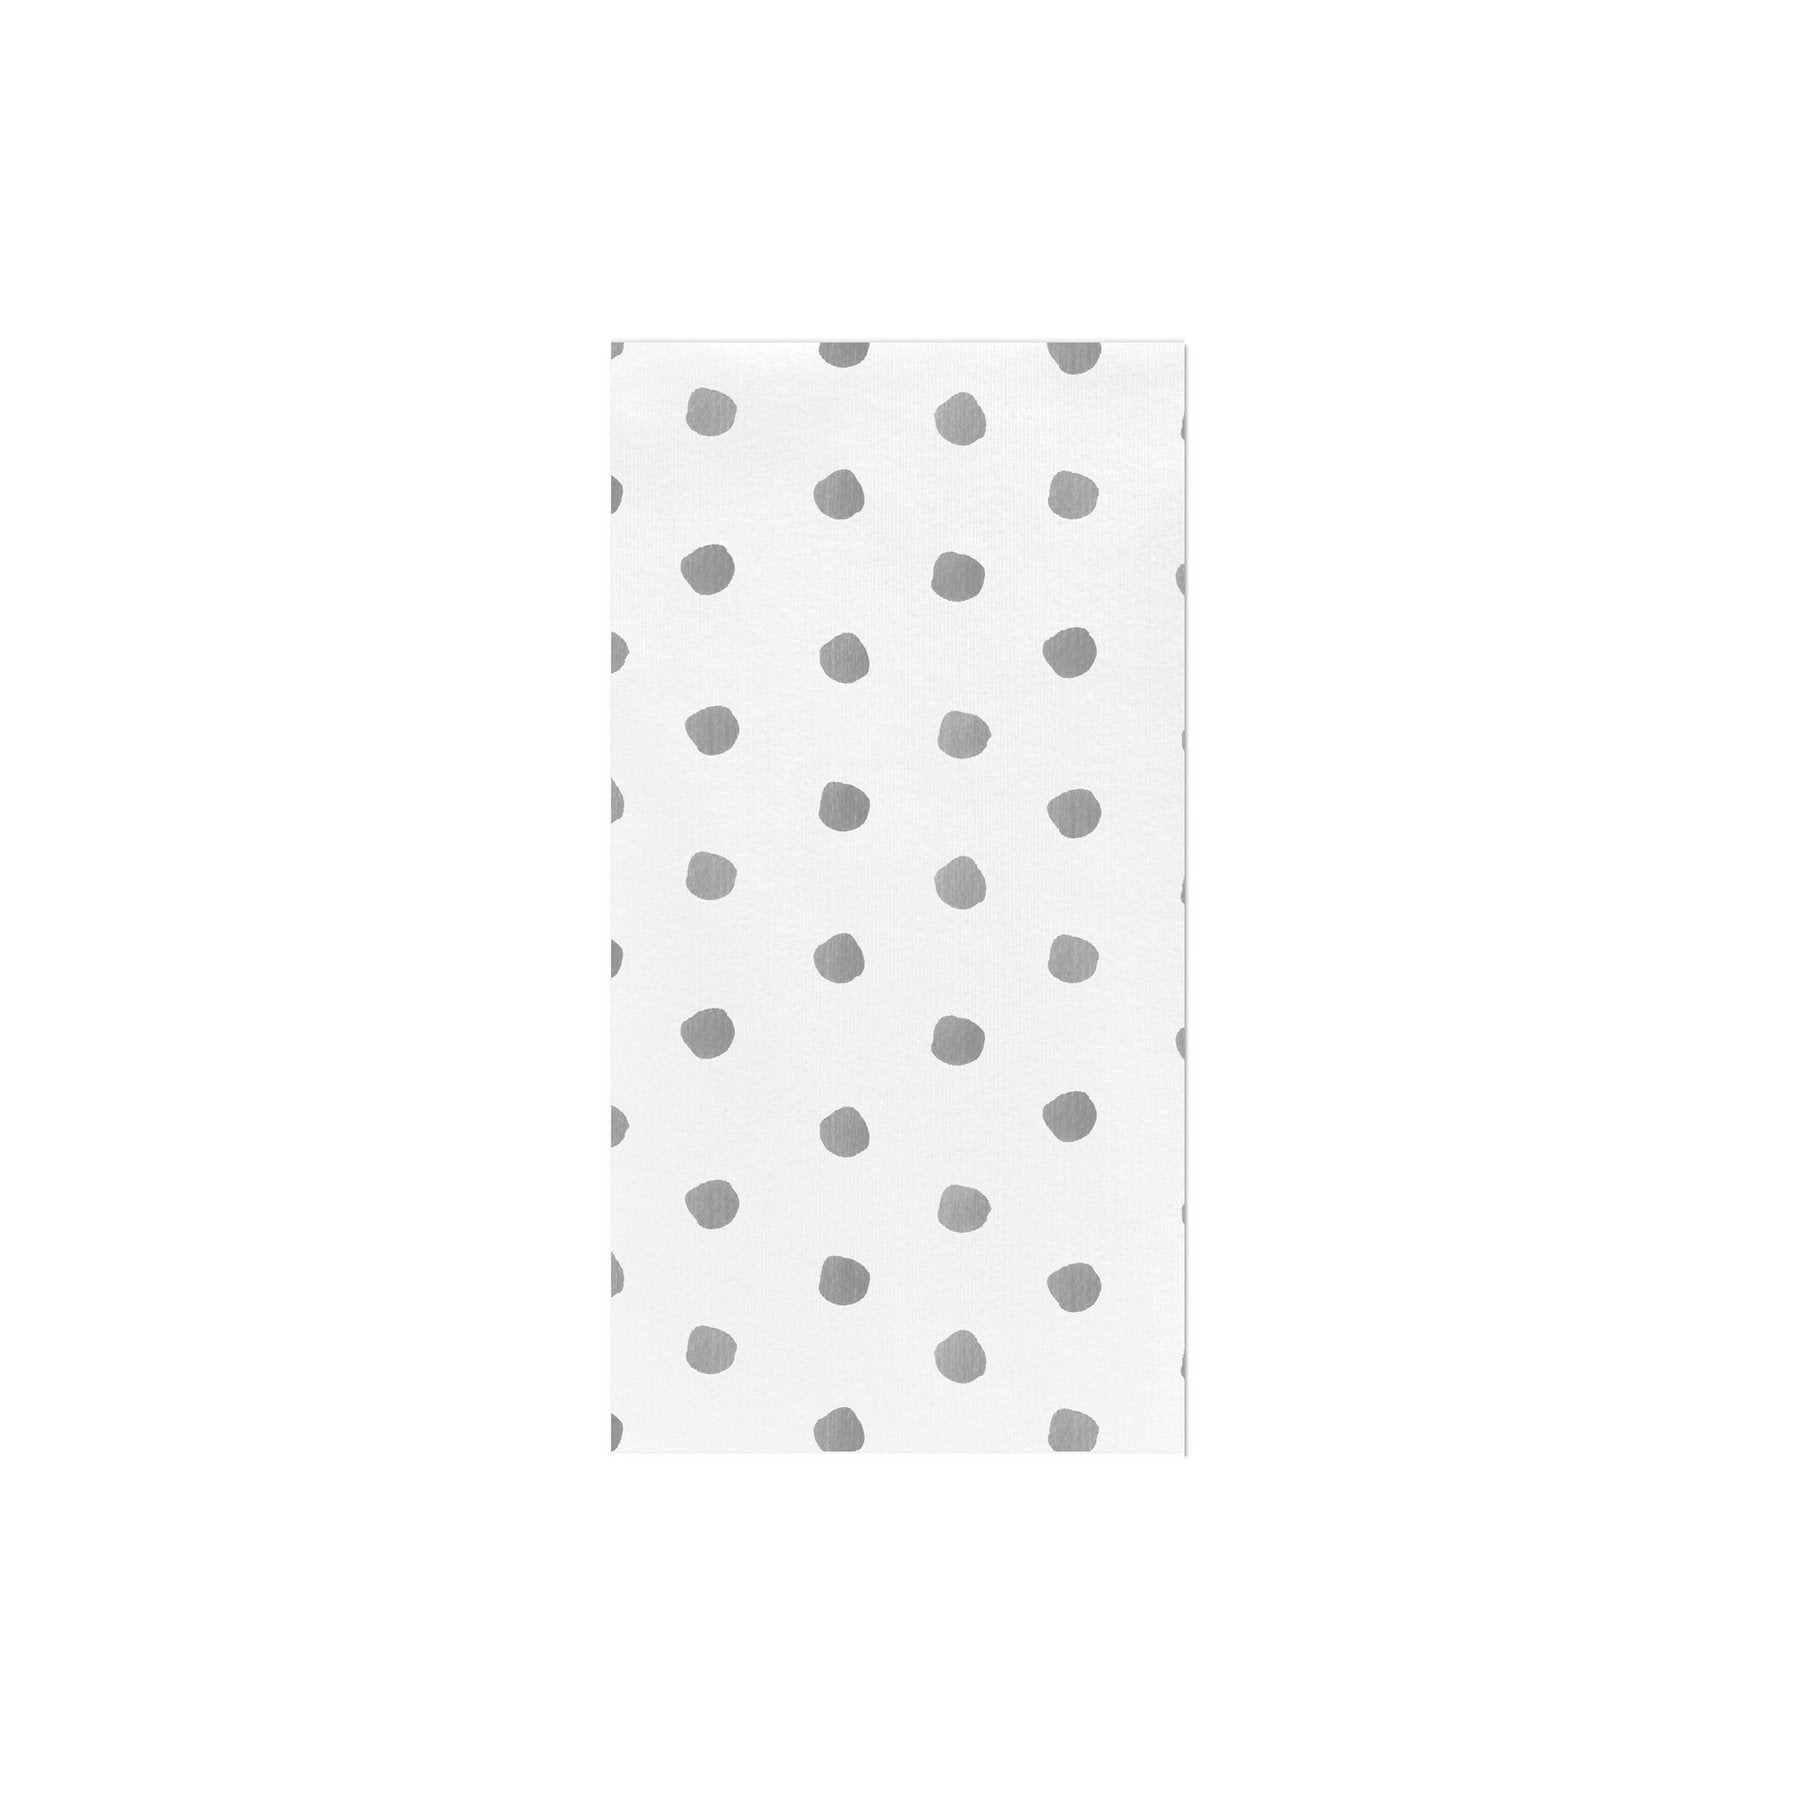 Papersoft Napkins Light Grey Dot Guest Towels - Pack of 20